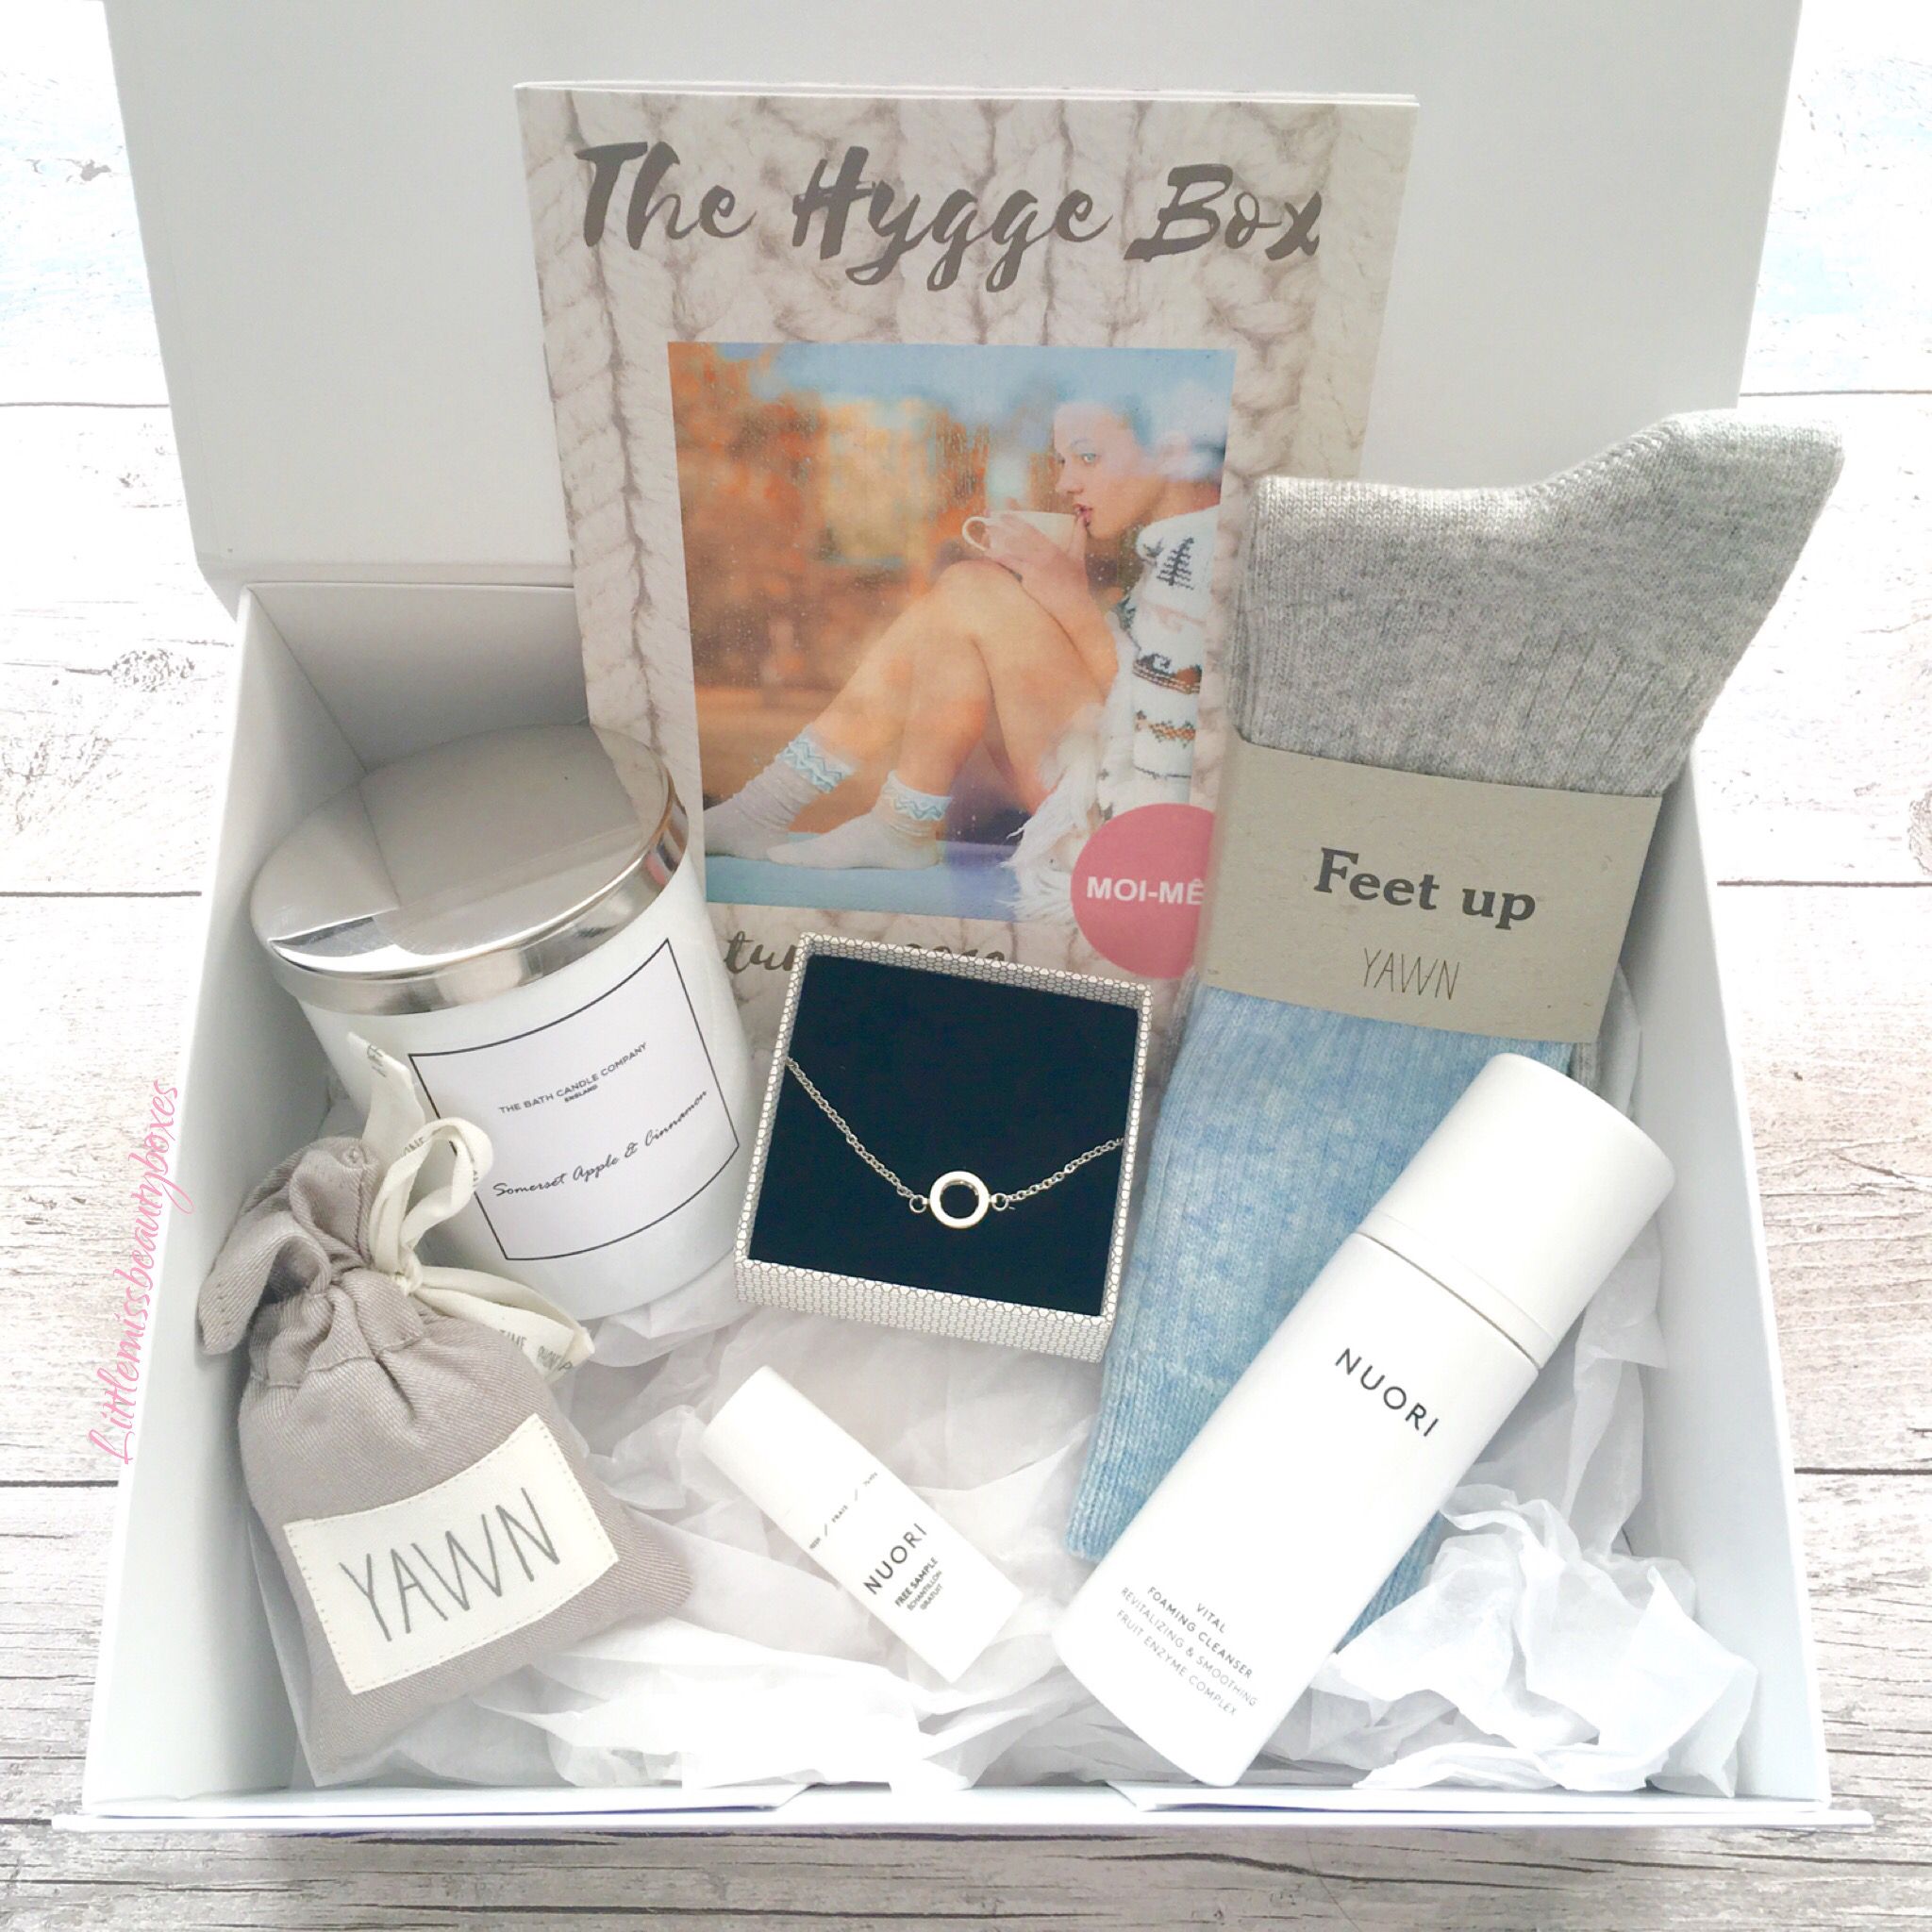 October moi-meme box is another absolutely amazing box! I love the ...